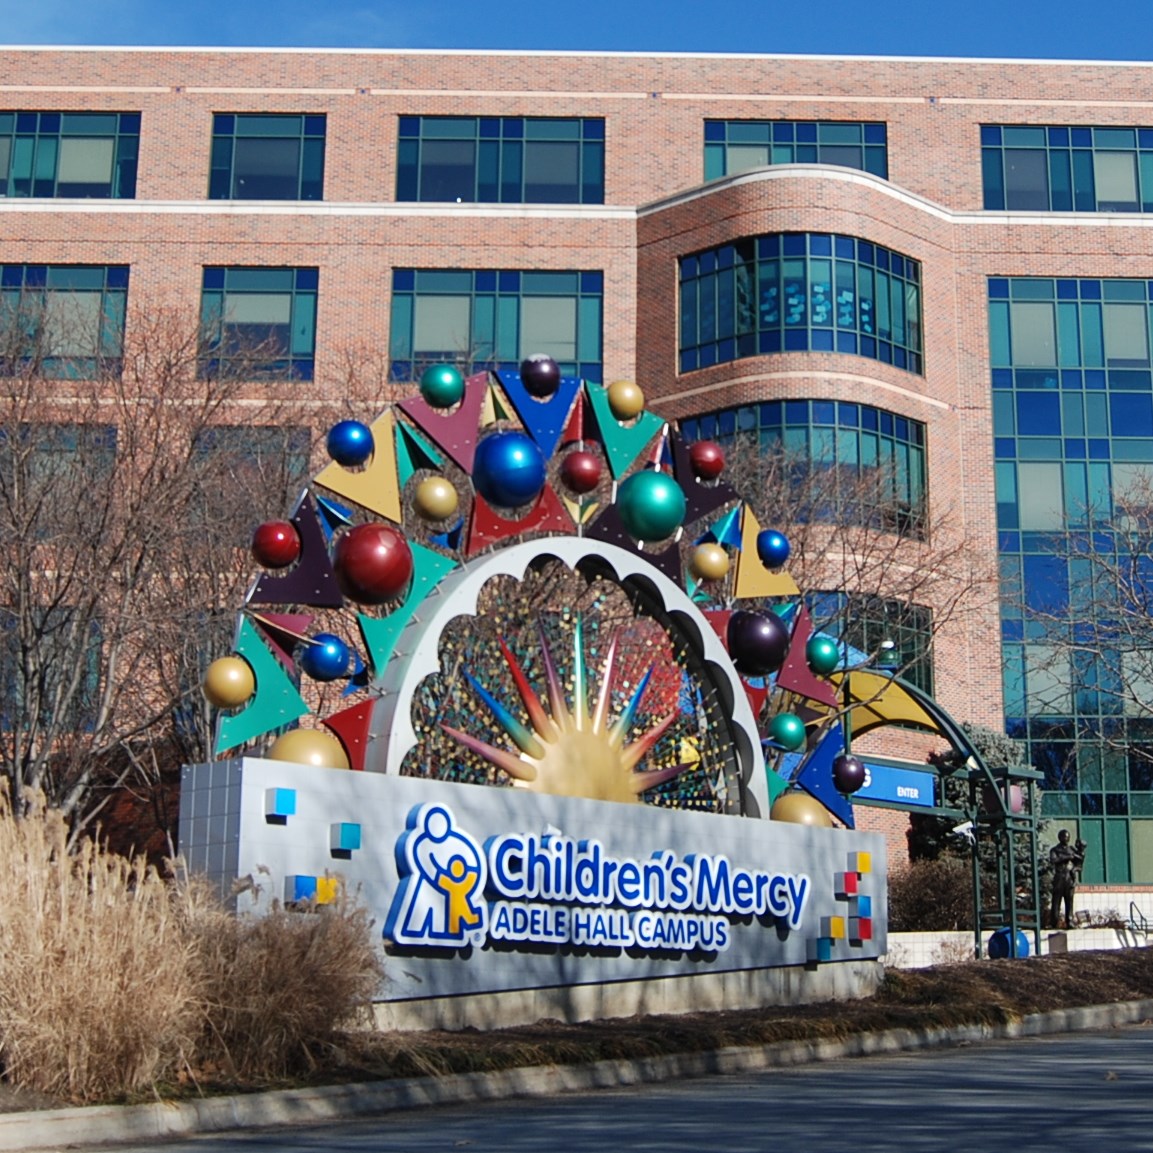 Children’s Mercy Hospital Sign with hopsital in background.